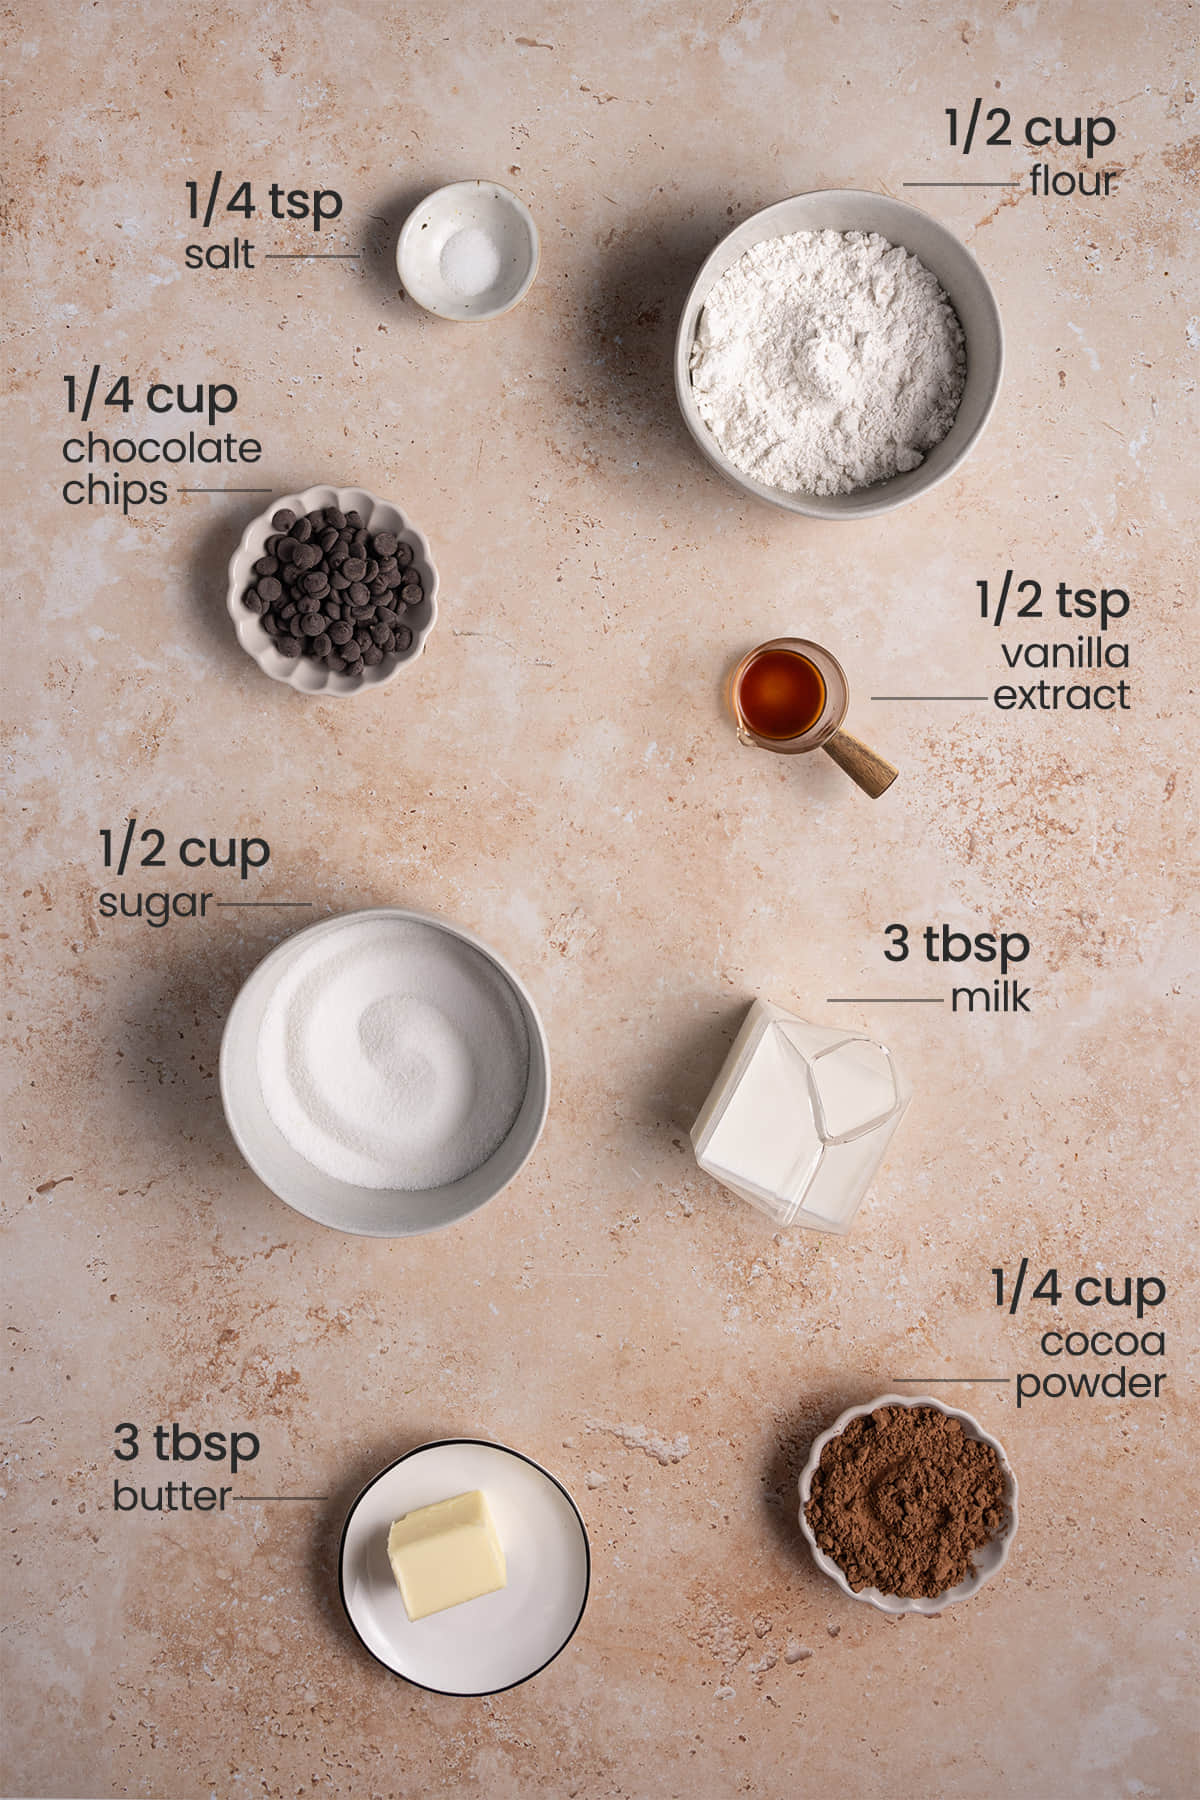 ingredients for edible brownie batter - salt, flour, chocolate chips, vanilla extract, sugar, milk, butter, cocoa powder